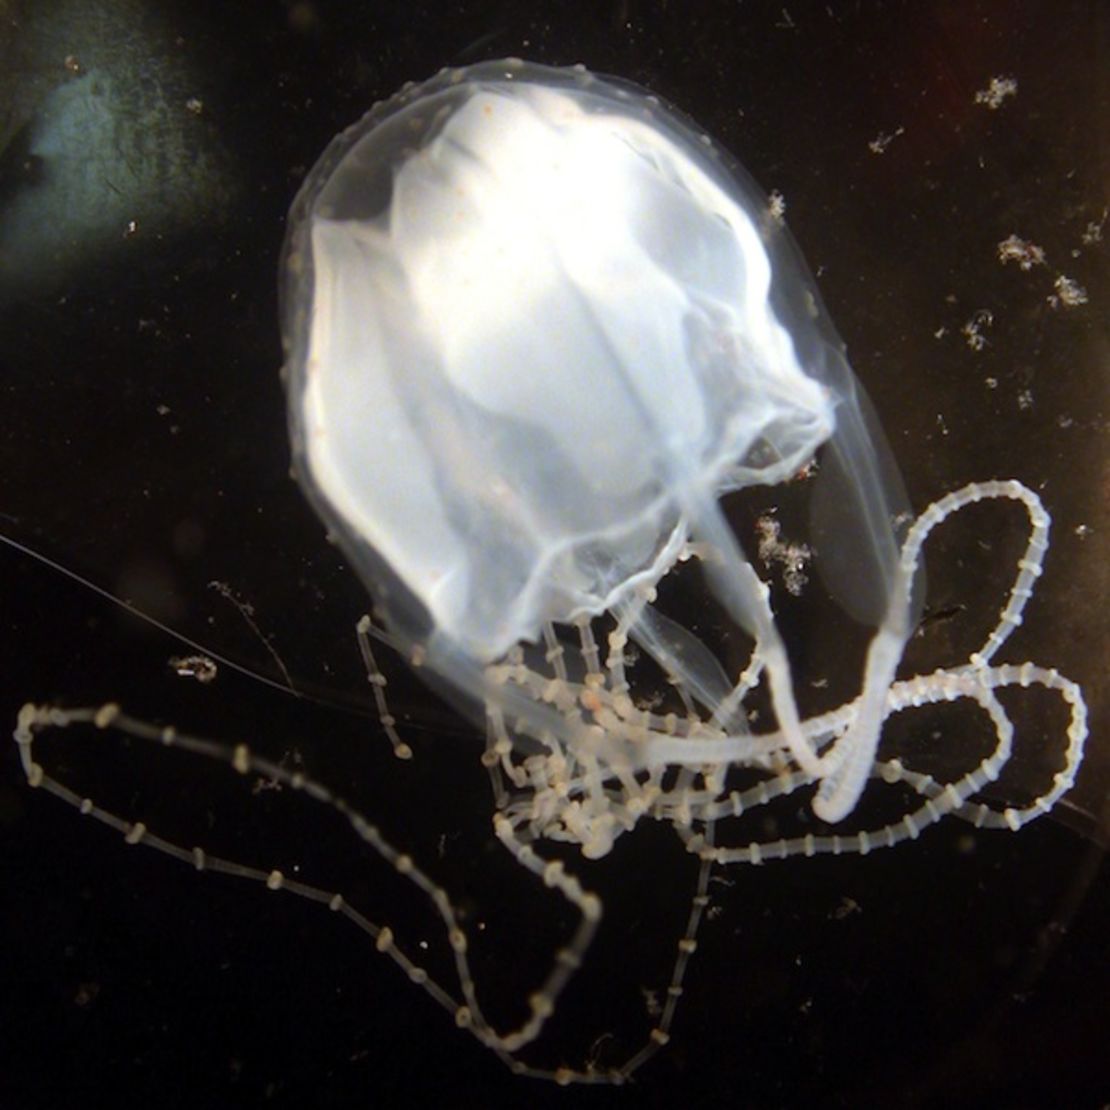 Jellyfish taking over oceans, experts warn